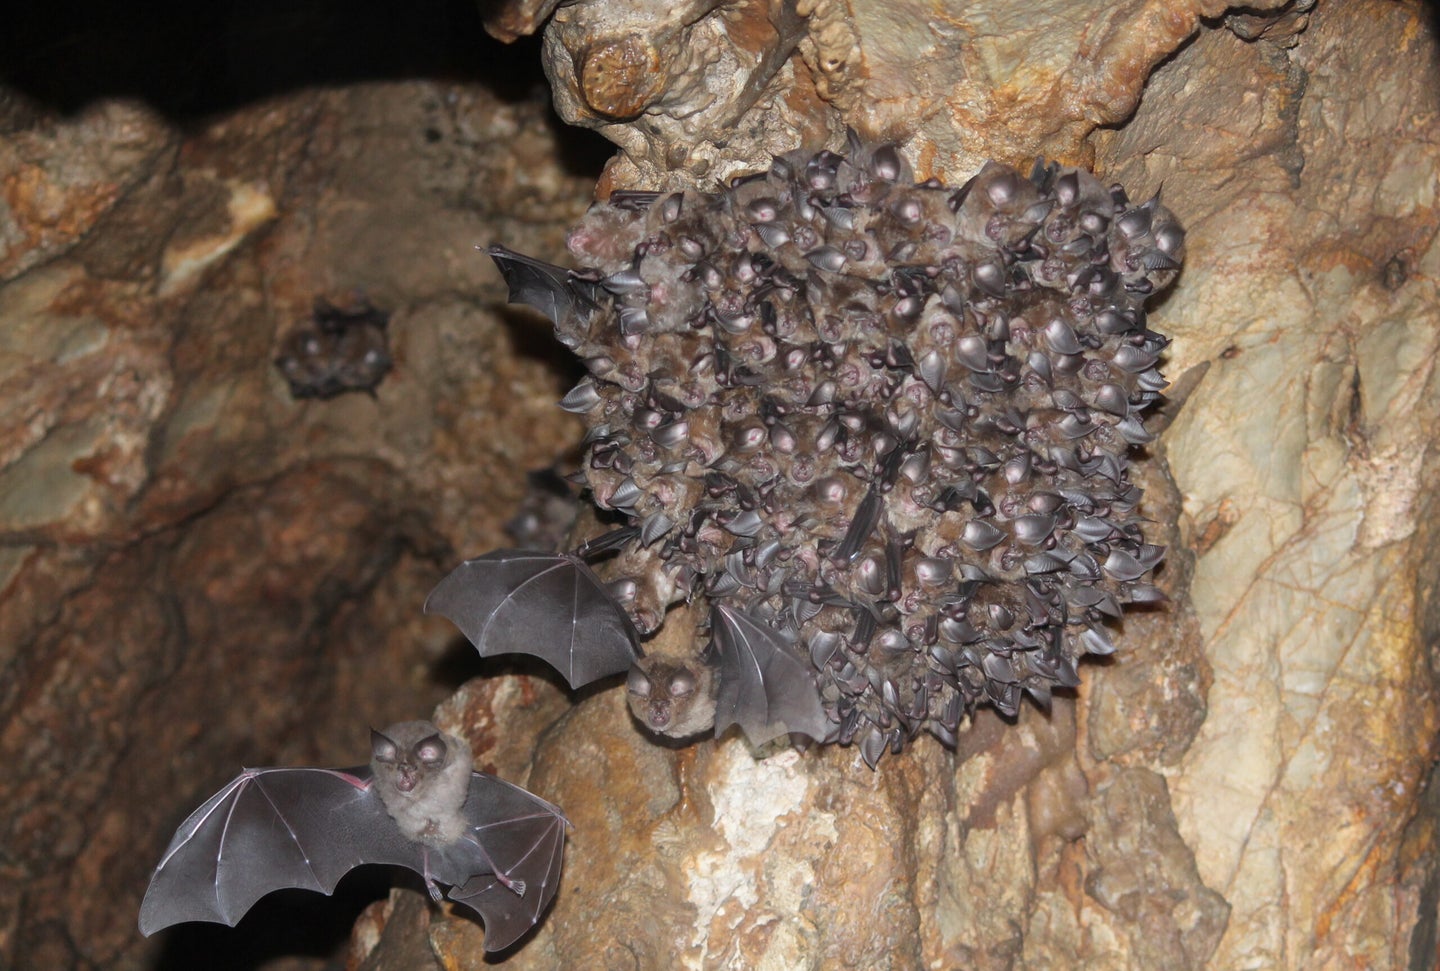 bats in a cave